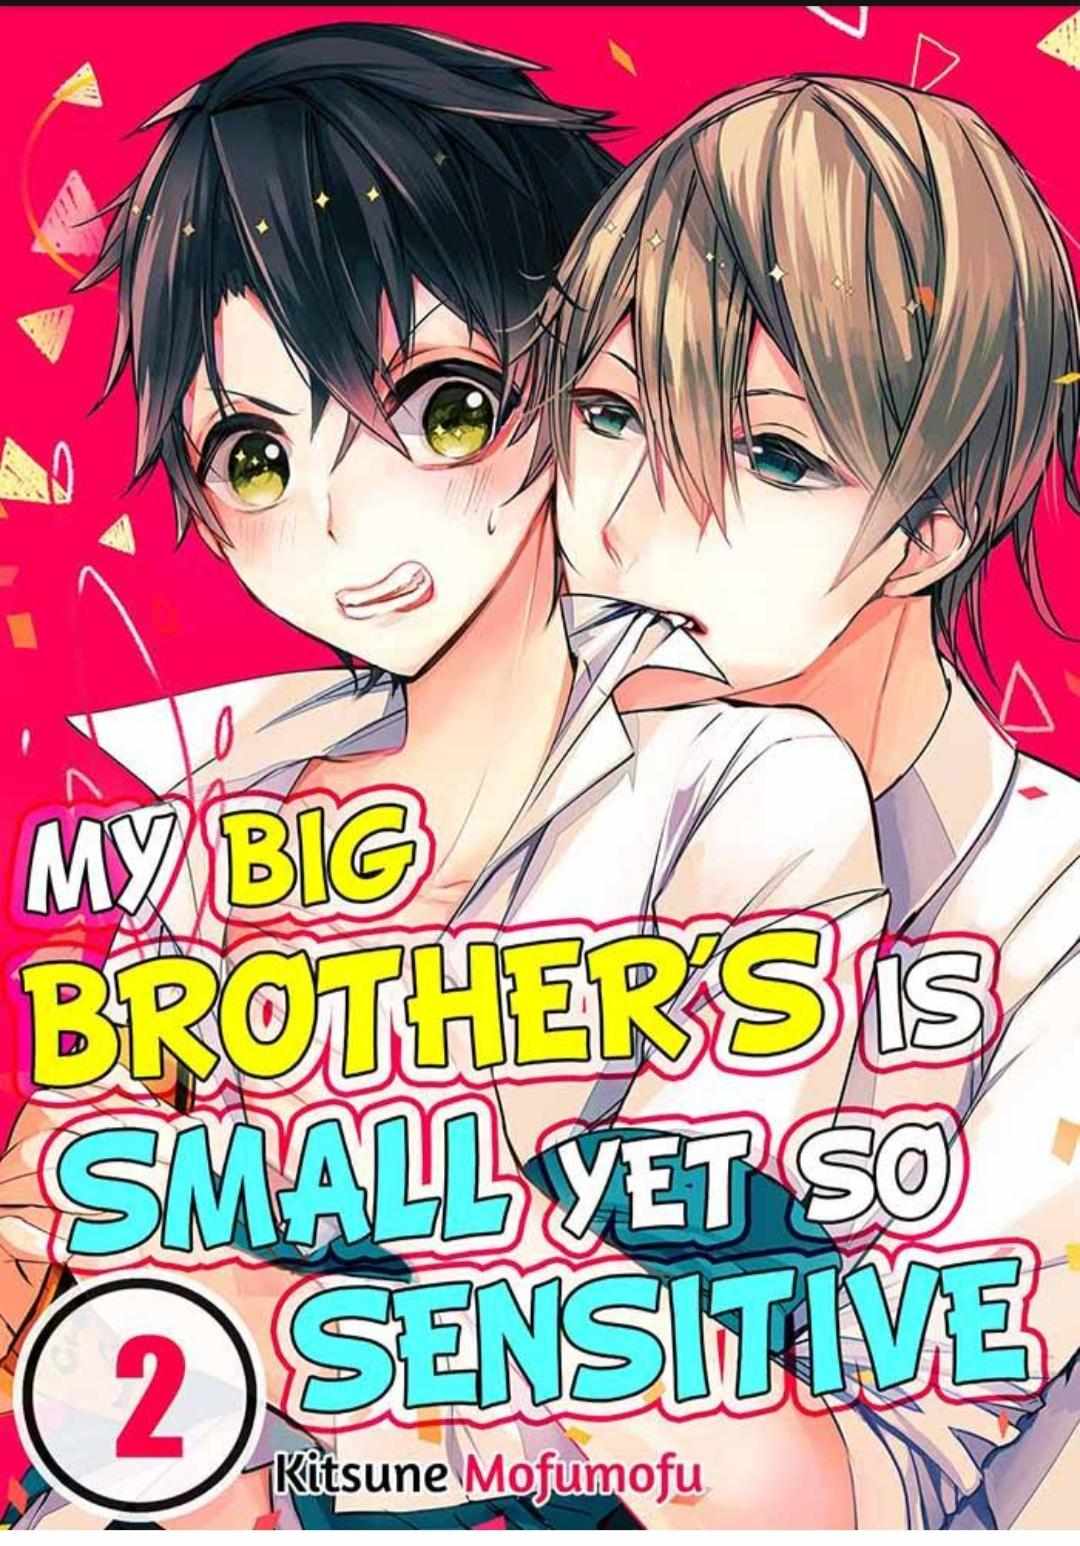 My Big Brother's is Small Yet So Sensitive - chapter 6 - #2